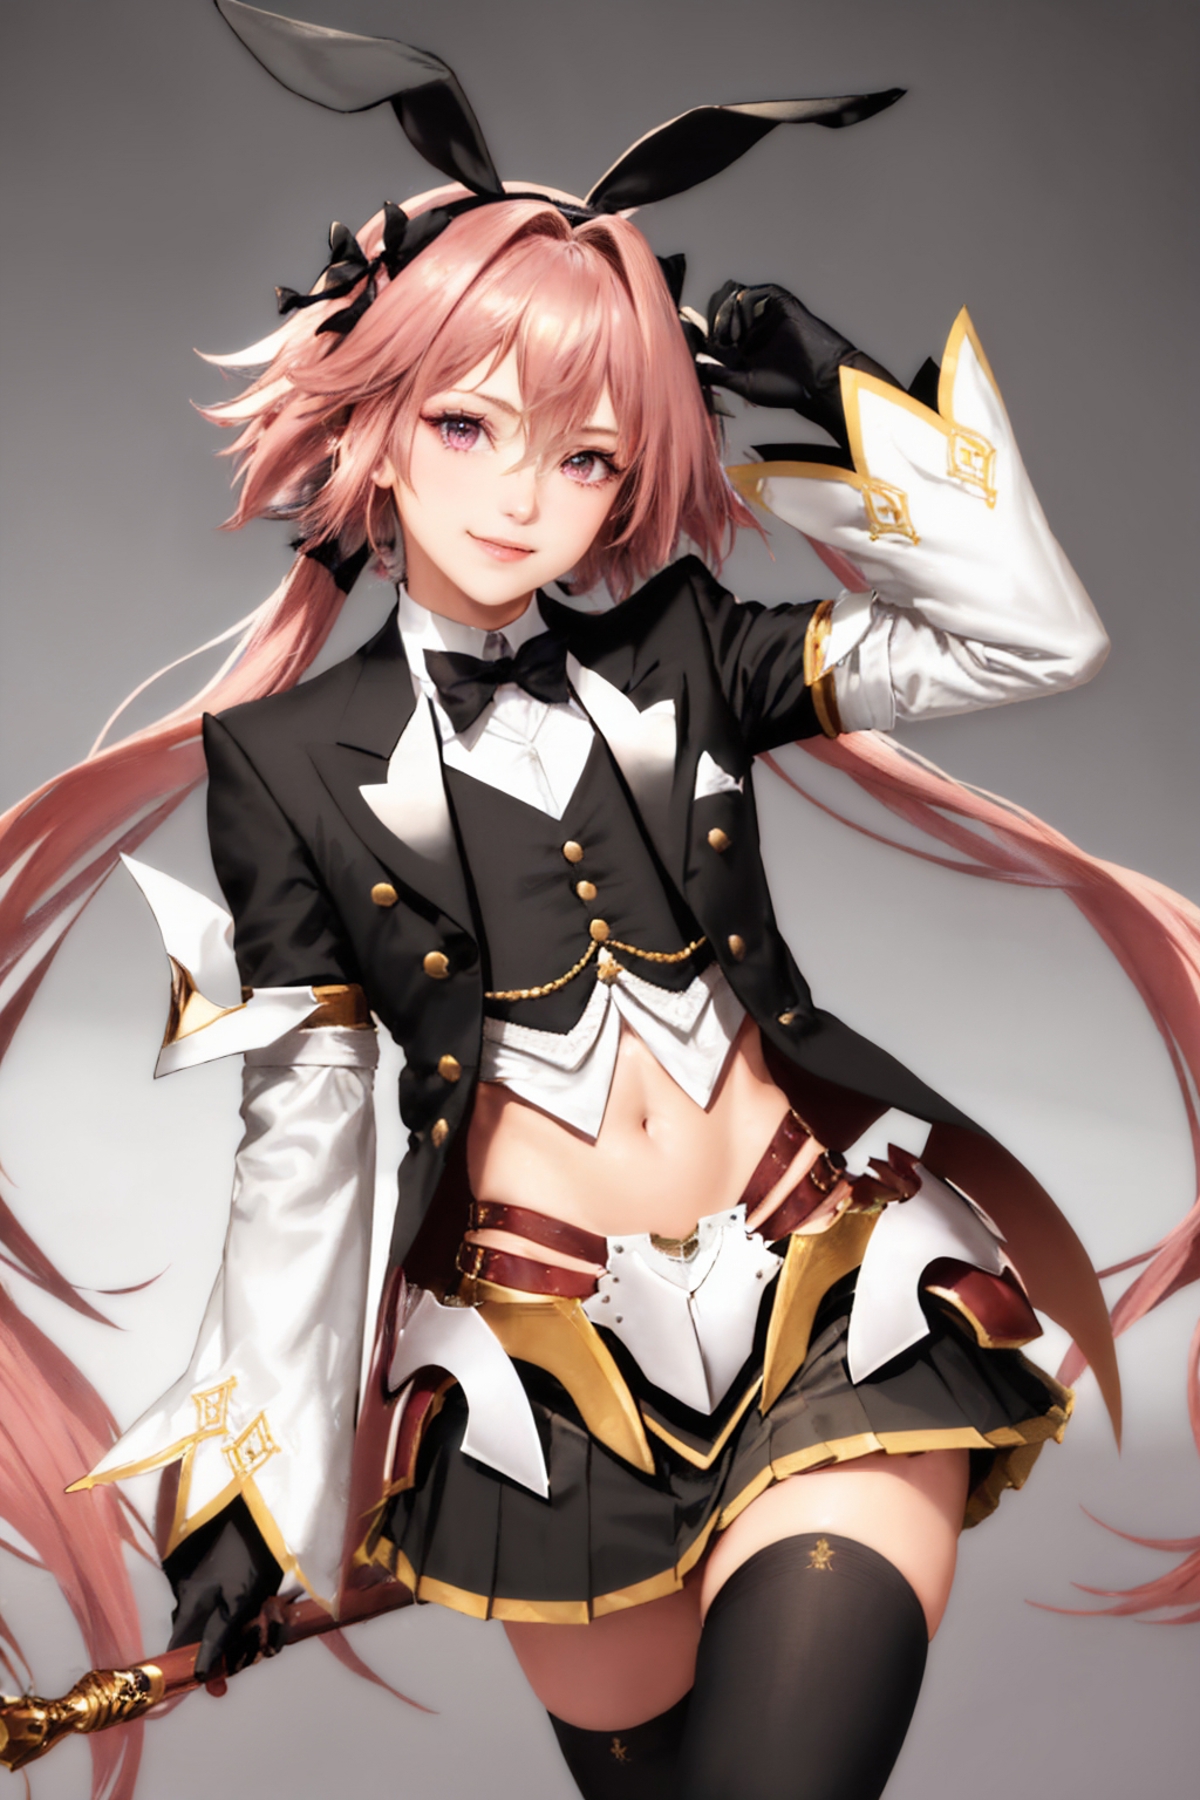 Astolfo (Saber) | Fate/Grand Order image by justTNP